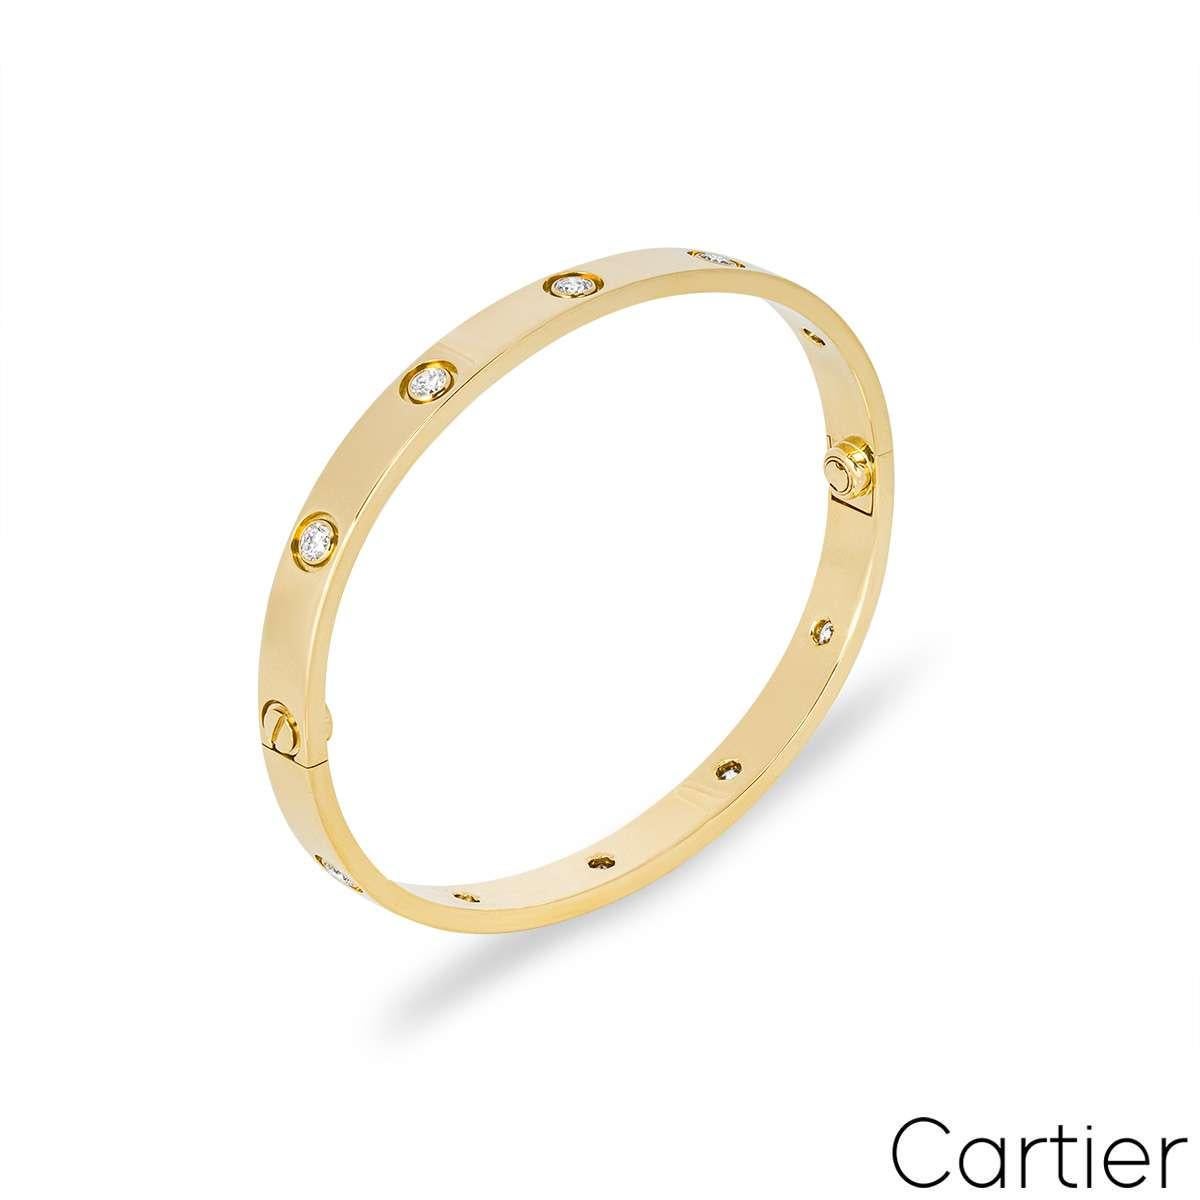 An 18k yellow gold full diamond bracelet by Cartier, from their iconic Love collection. The bracelet is set with 10 round brilliant cut diamonds totalling approximately 0.96ct. A size 17, featuring the Cartier service screws, the bracelet measures